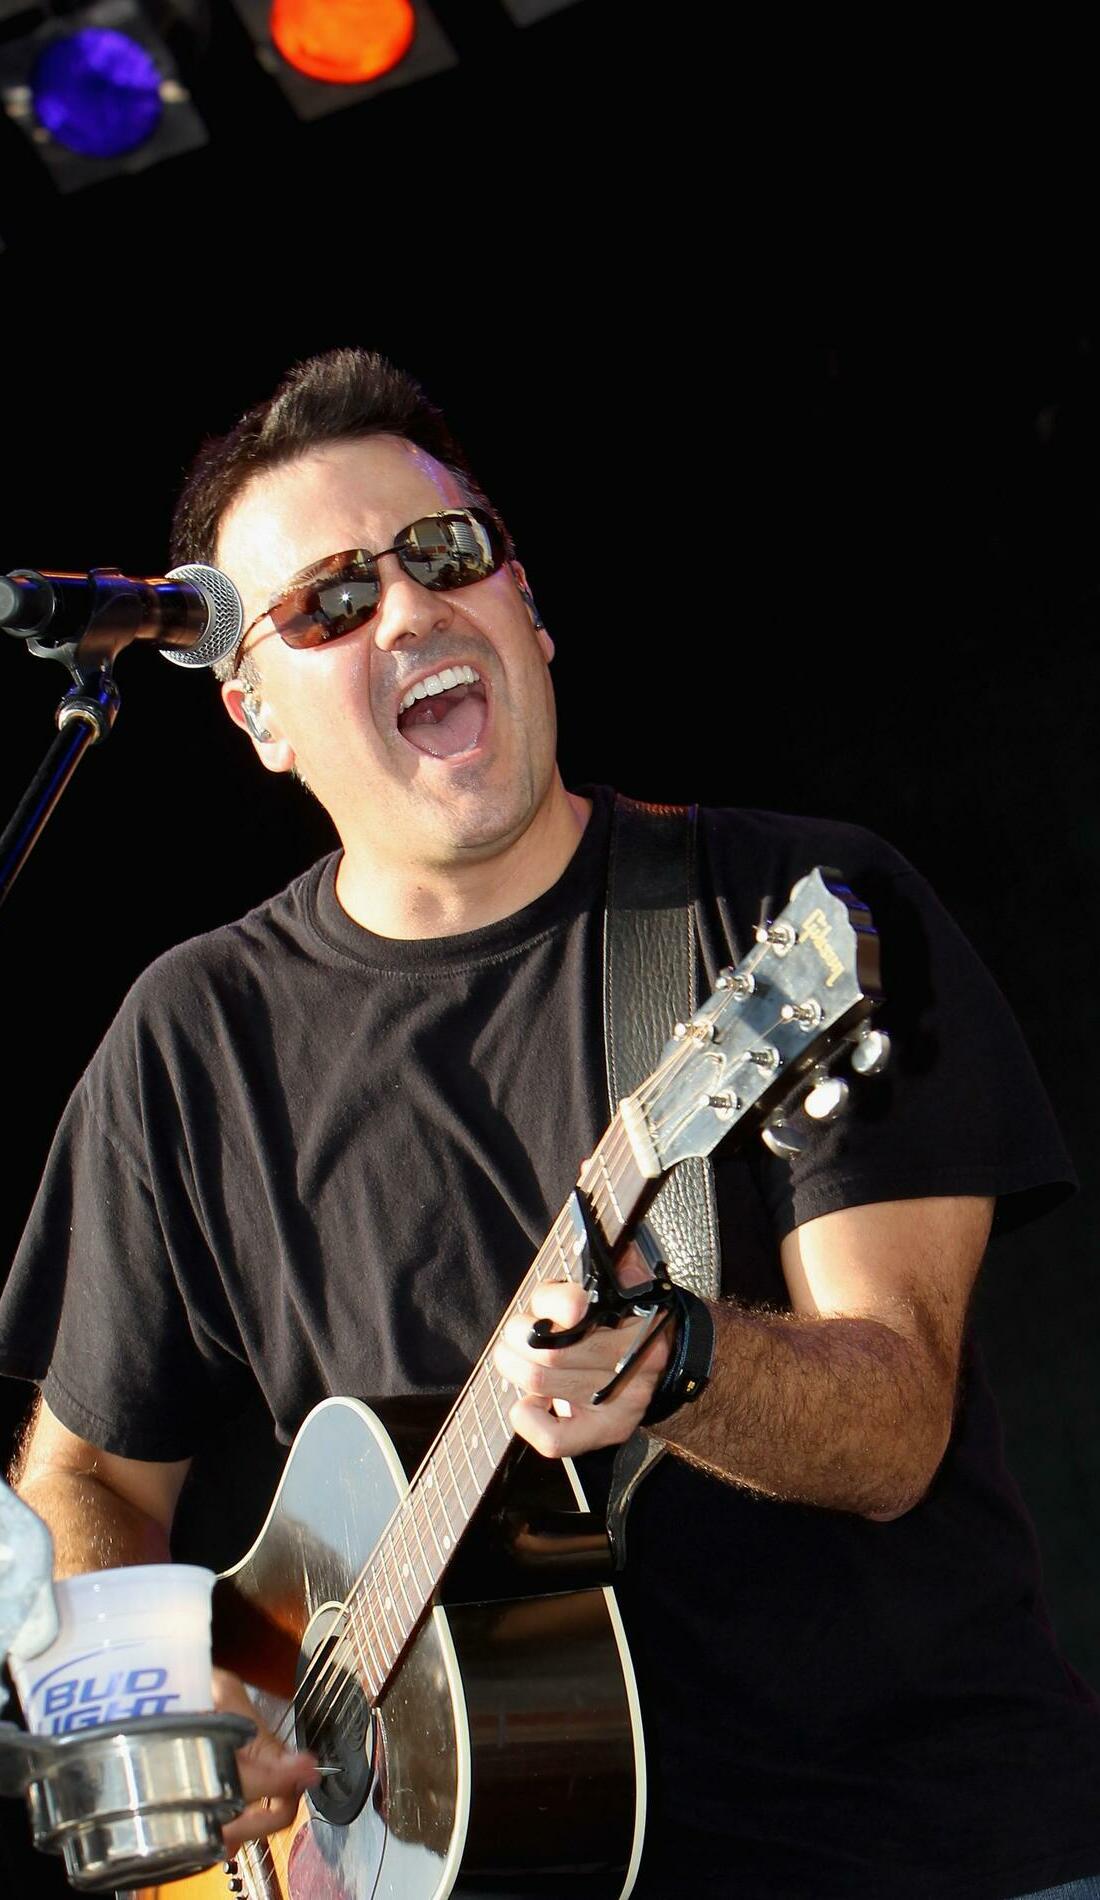 A Roger Creager live event